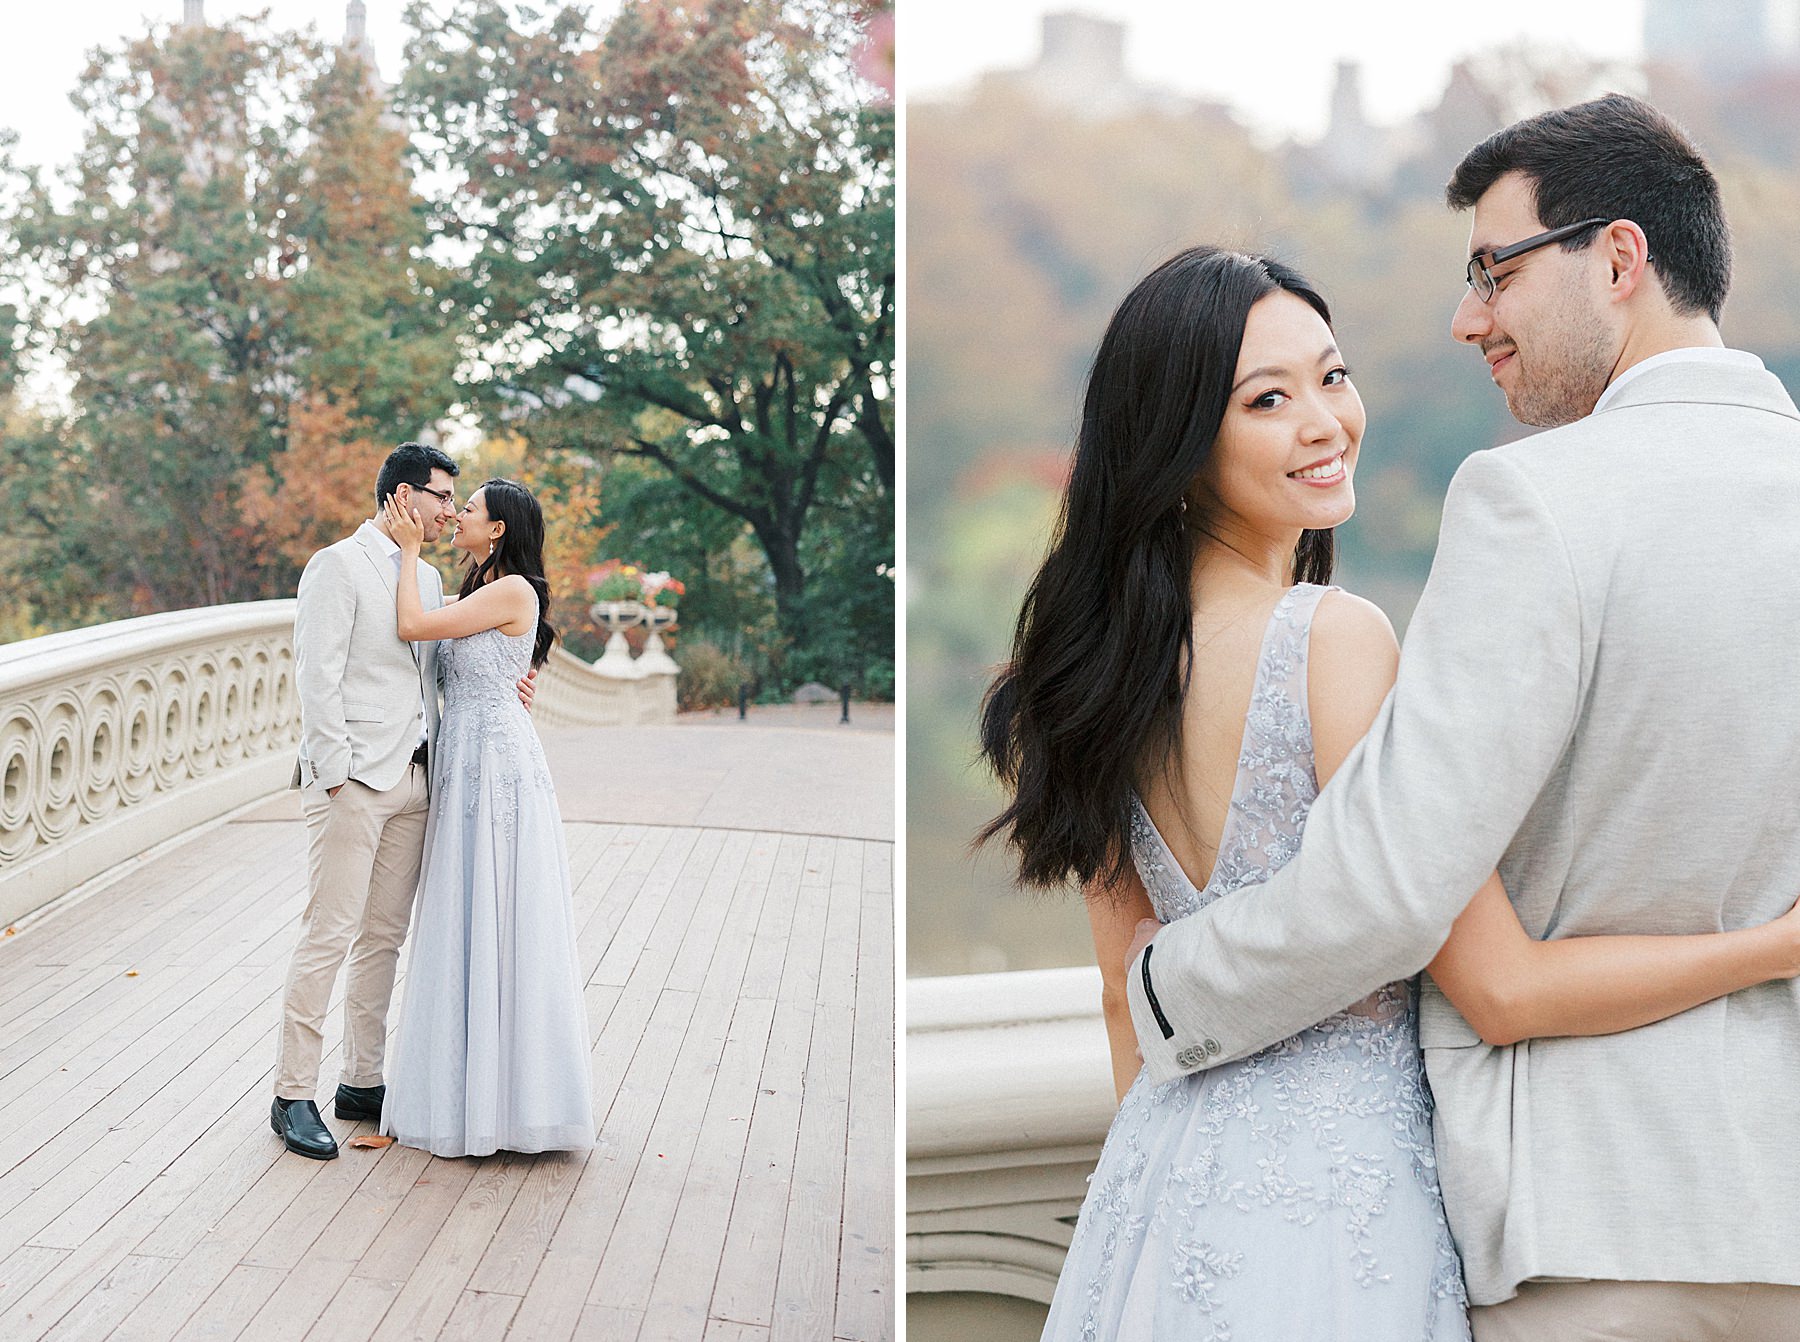 What to Wear for Your Engagement Photos